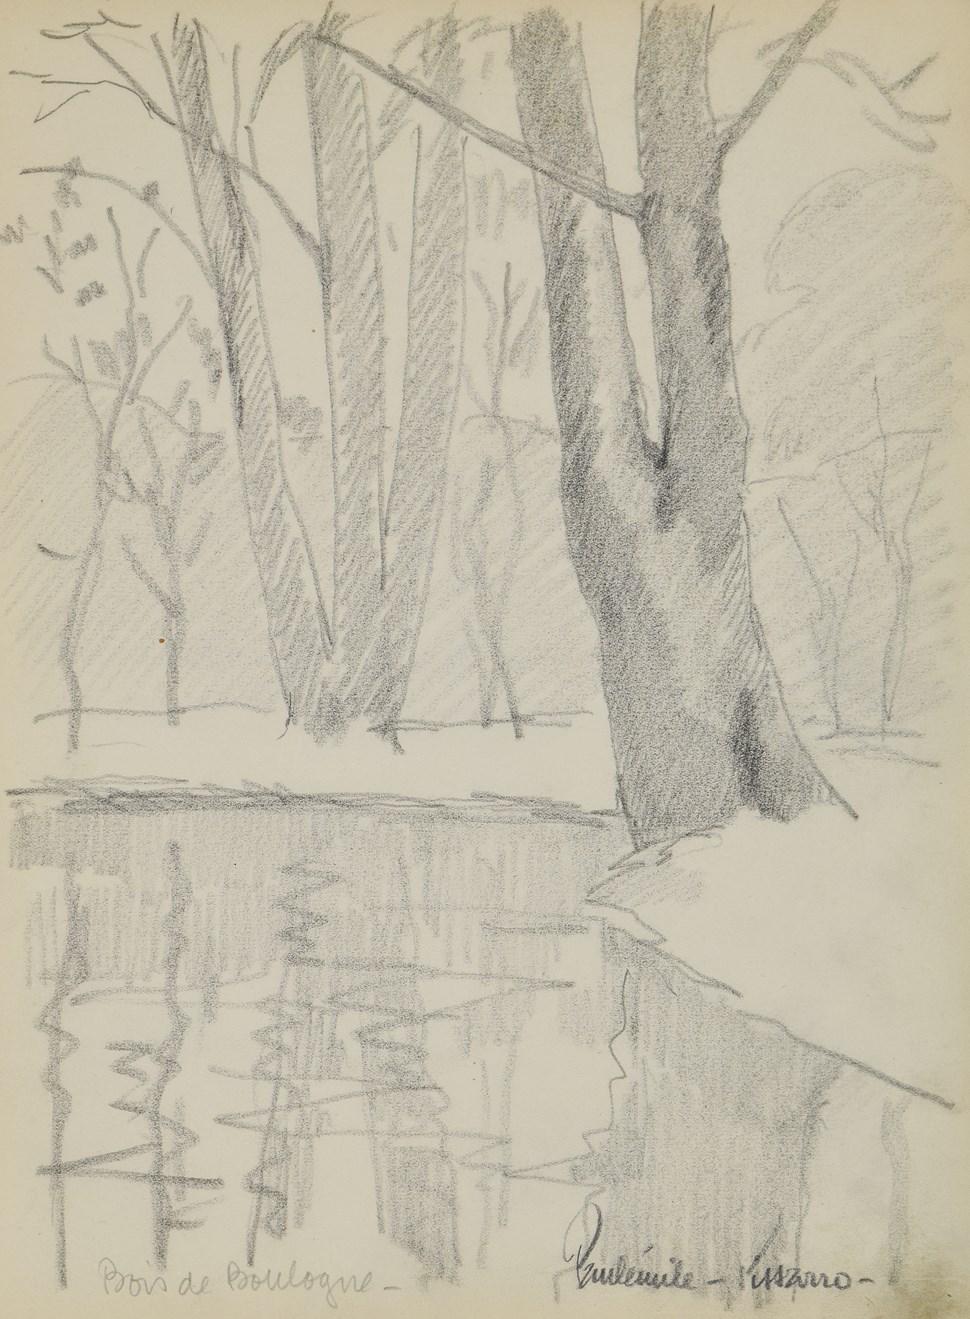 SOLD UNFRAMED

Bois de Boulogne by Paulémile Pissarro (1884-1972)
Graphite on paper
32 x 23.5 cm (12 ⁵/₈ x 9 ¹/₄ inches)
Signed lower right, Paulémile-Pissarro-, and titled lower left
Executed circa 1934

This work is accompanied by a certificate of